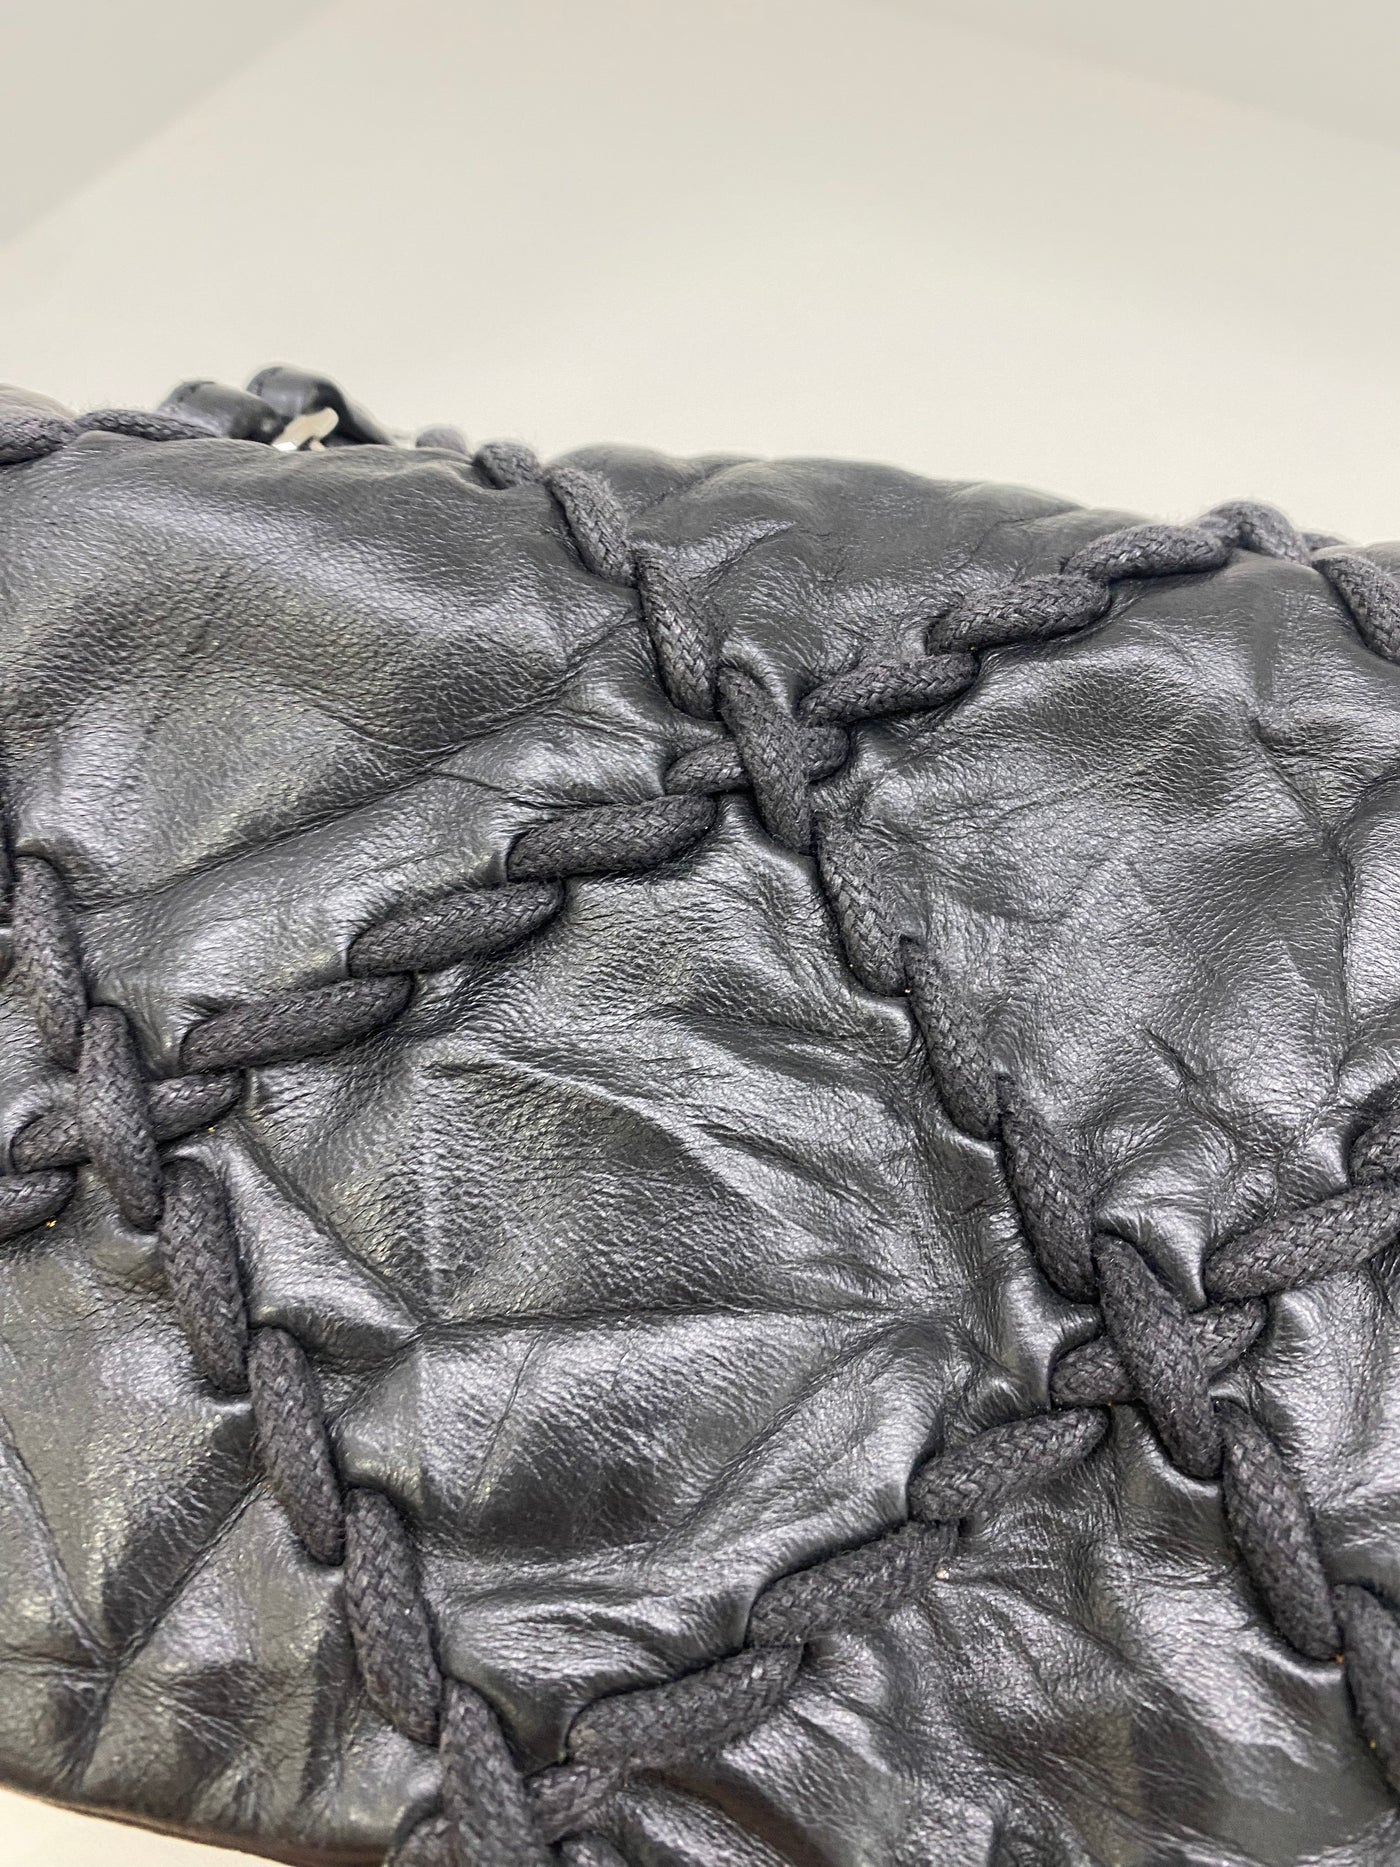 Chanel Large Quilted Detail Black Flap Bag